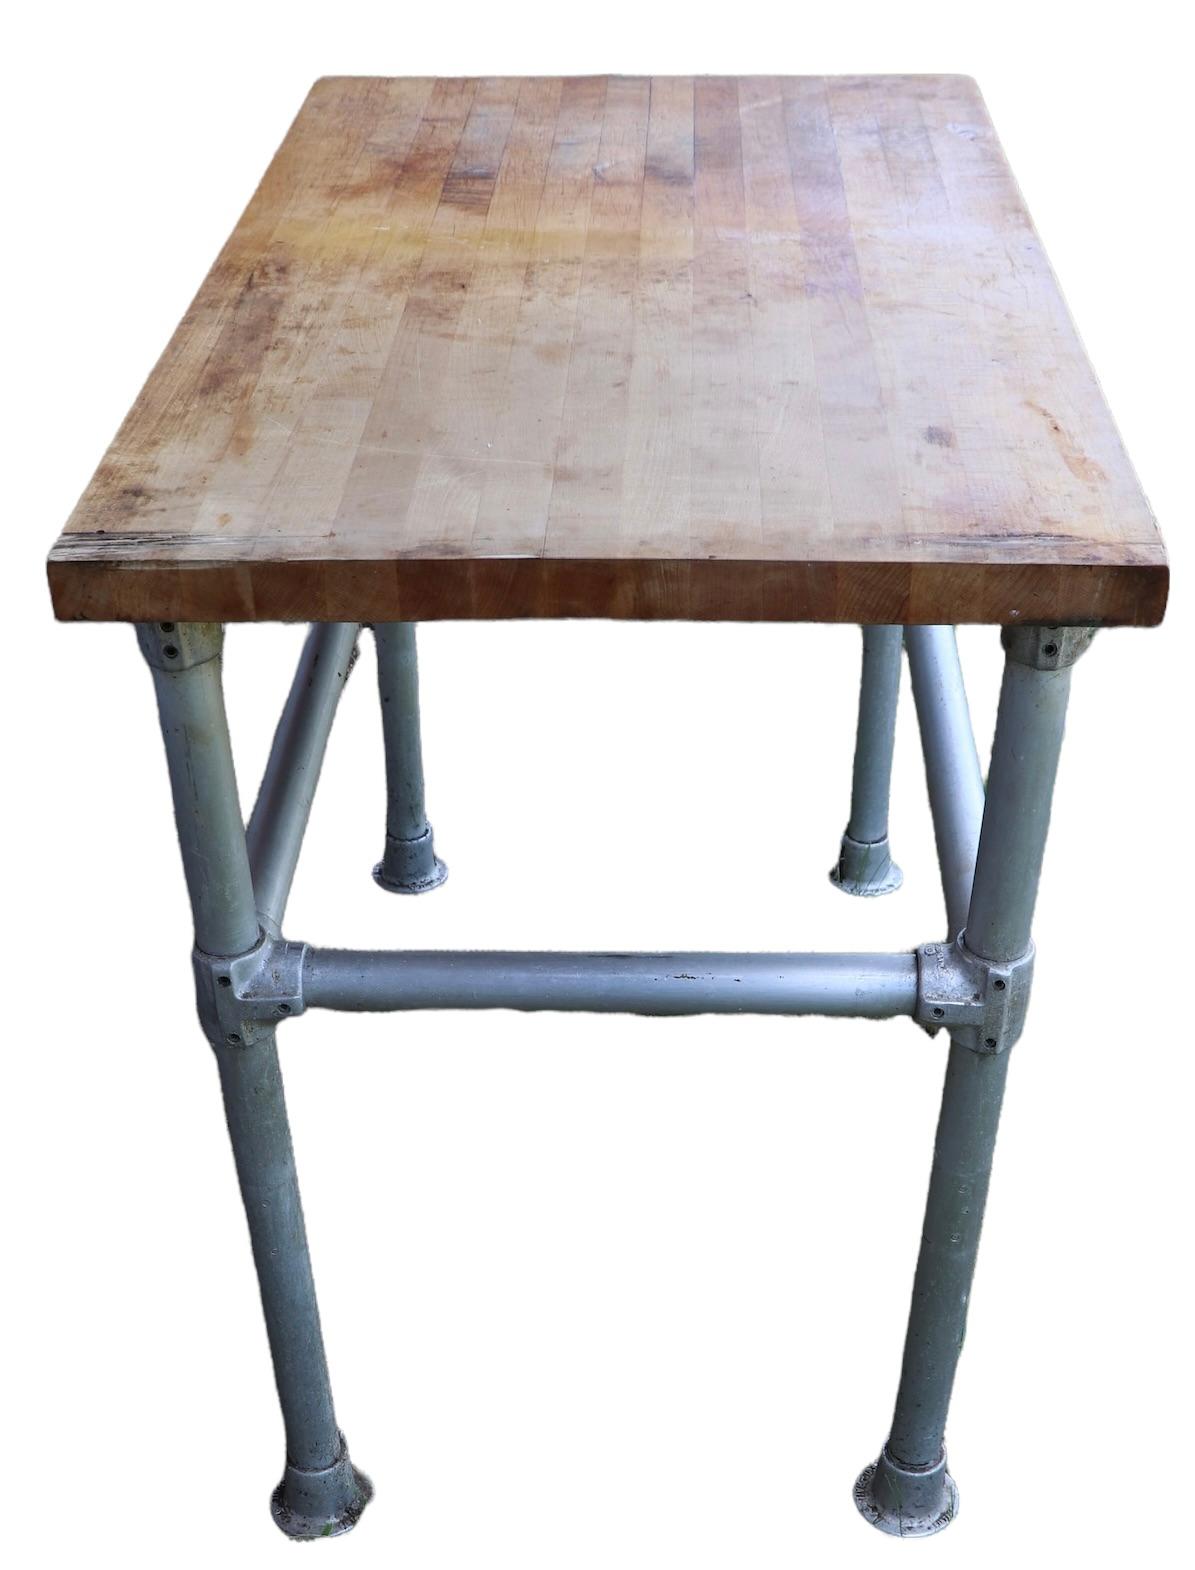 Commercial Butcher Block and Iron Work Table with Storage Drawer  5